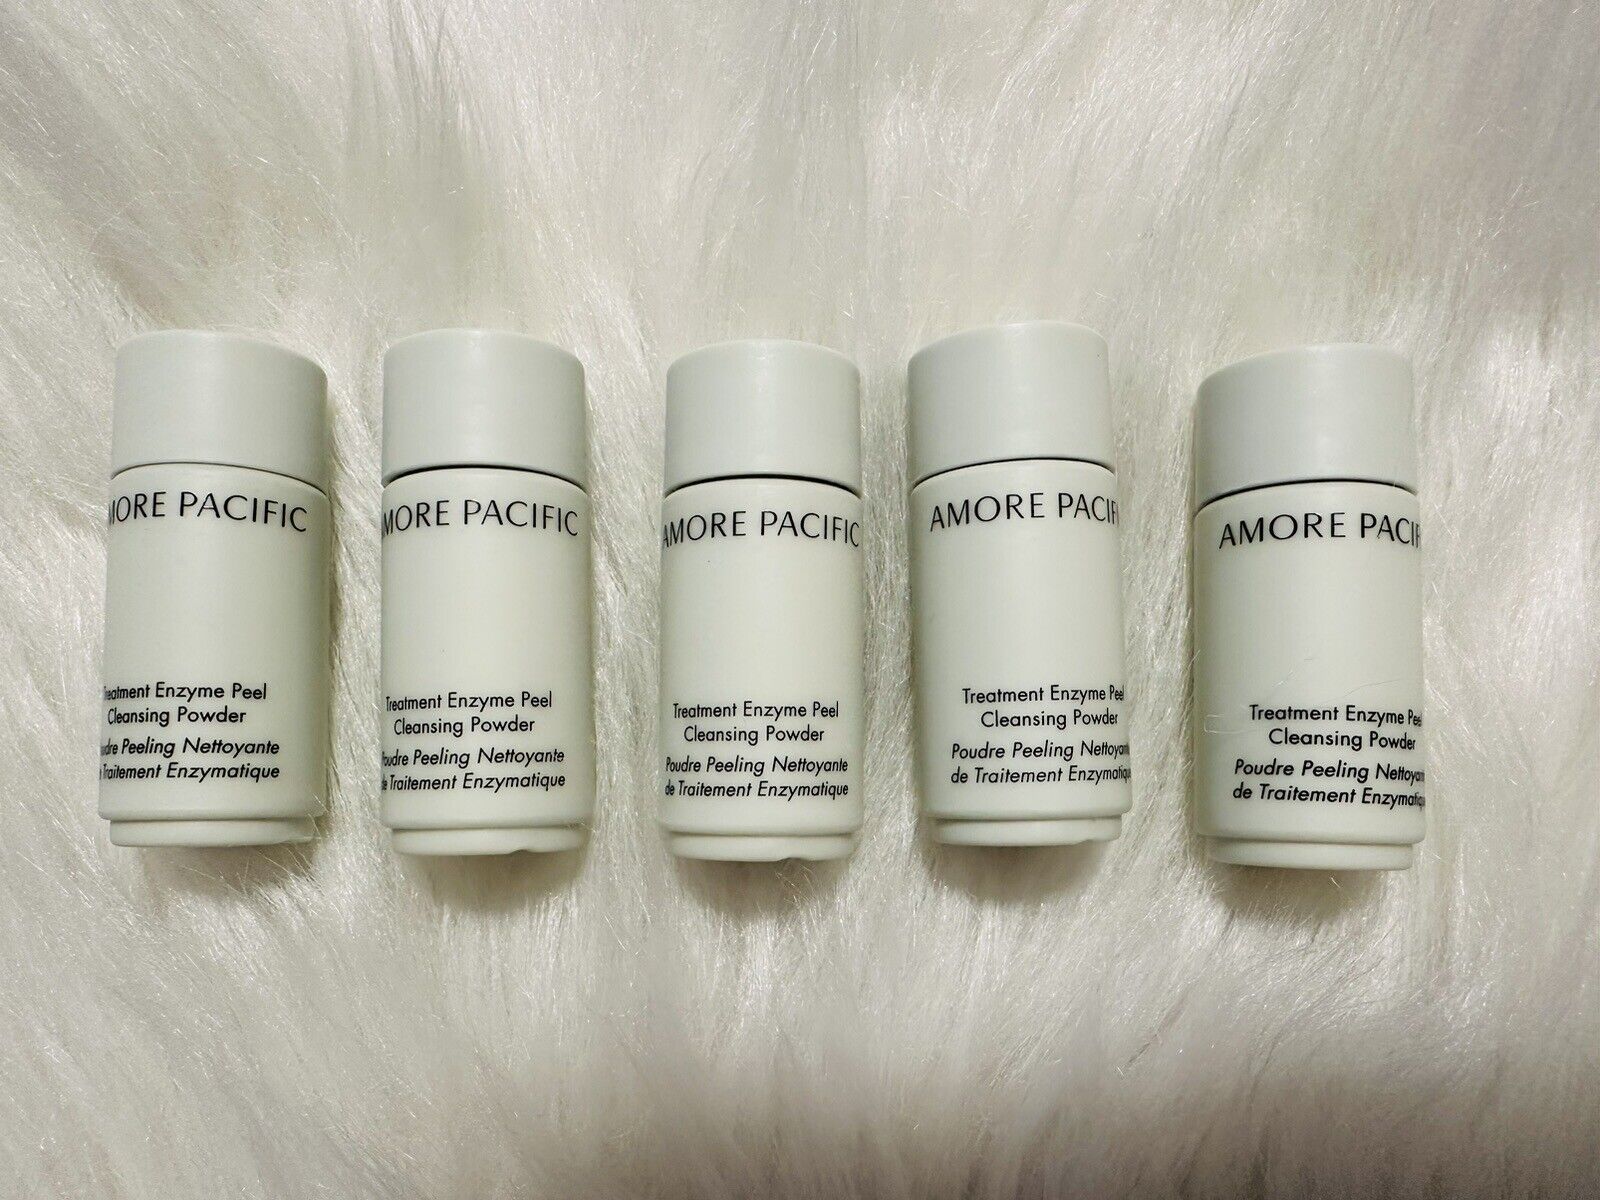 Amore Pacific Treatment Enzyme Peel Cleansing Powder 5g X 5 Pcs = 25g.New No Box